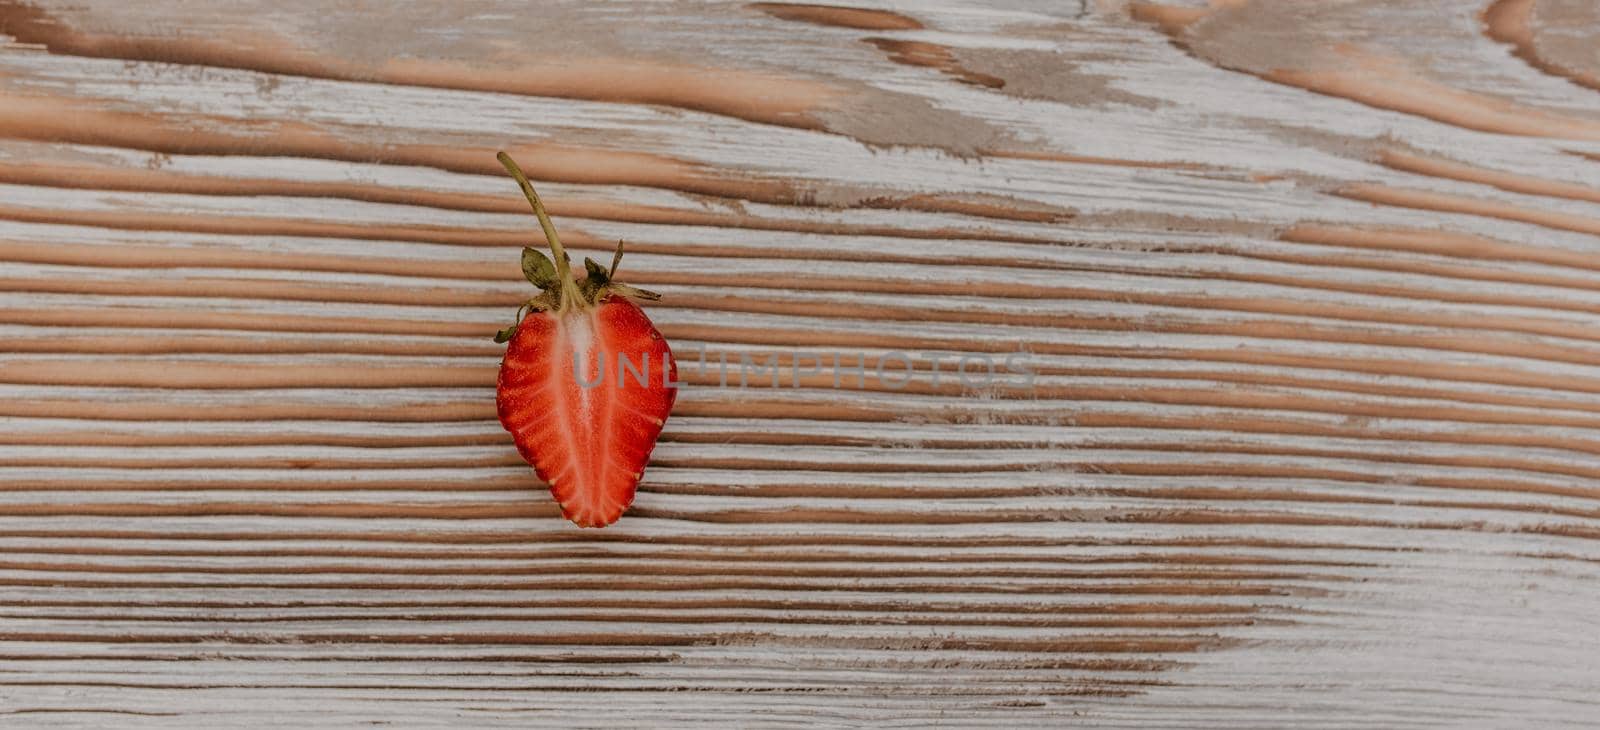 Juicy red strawberry lies on the wooden board summer background by AndriiDrachuk